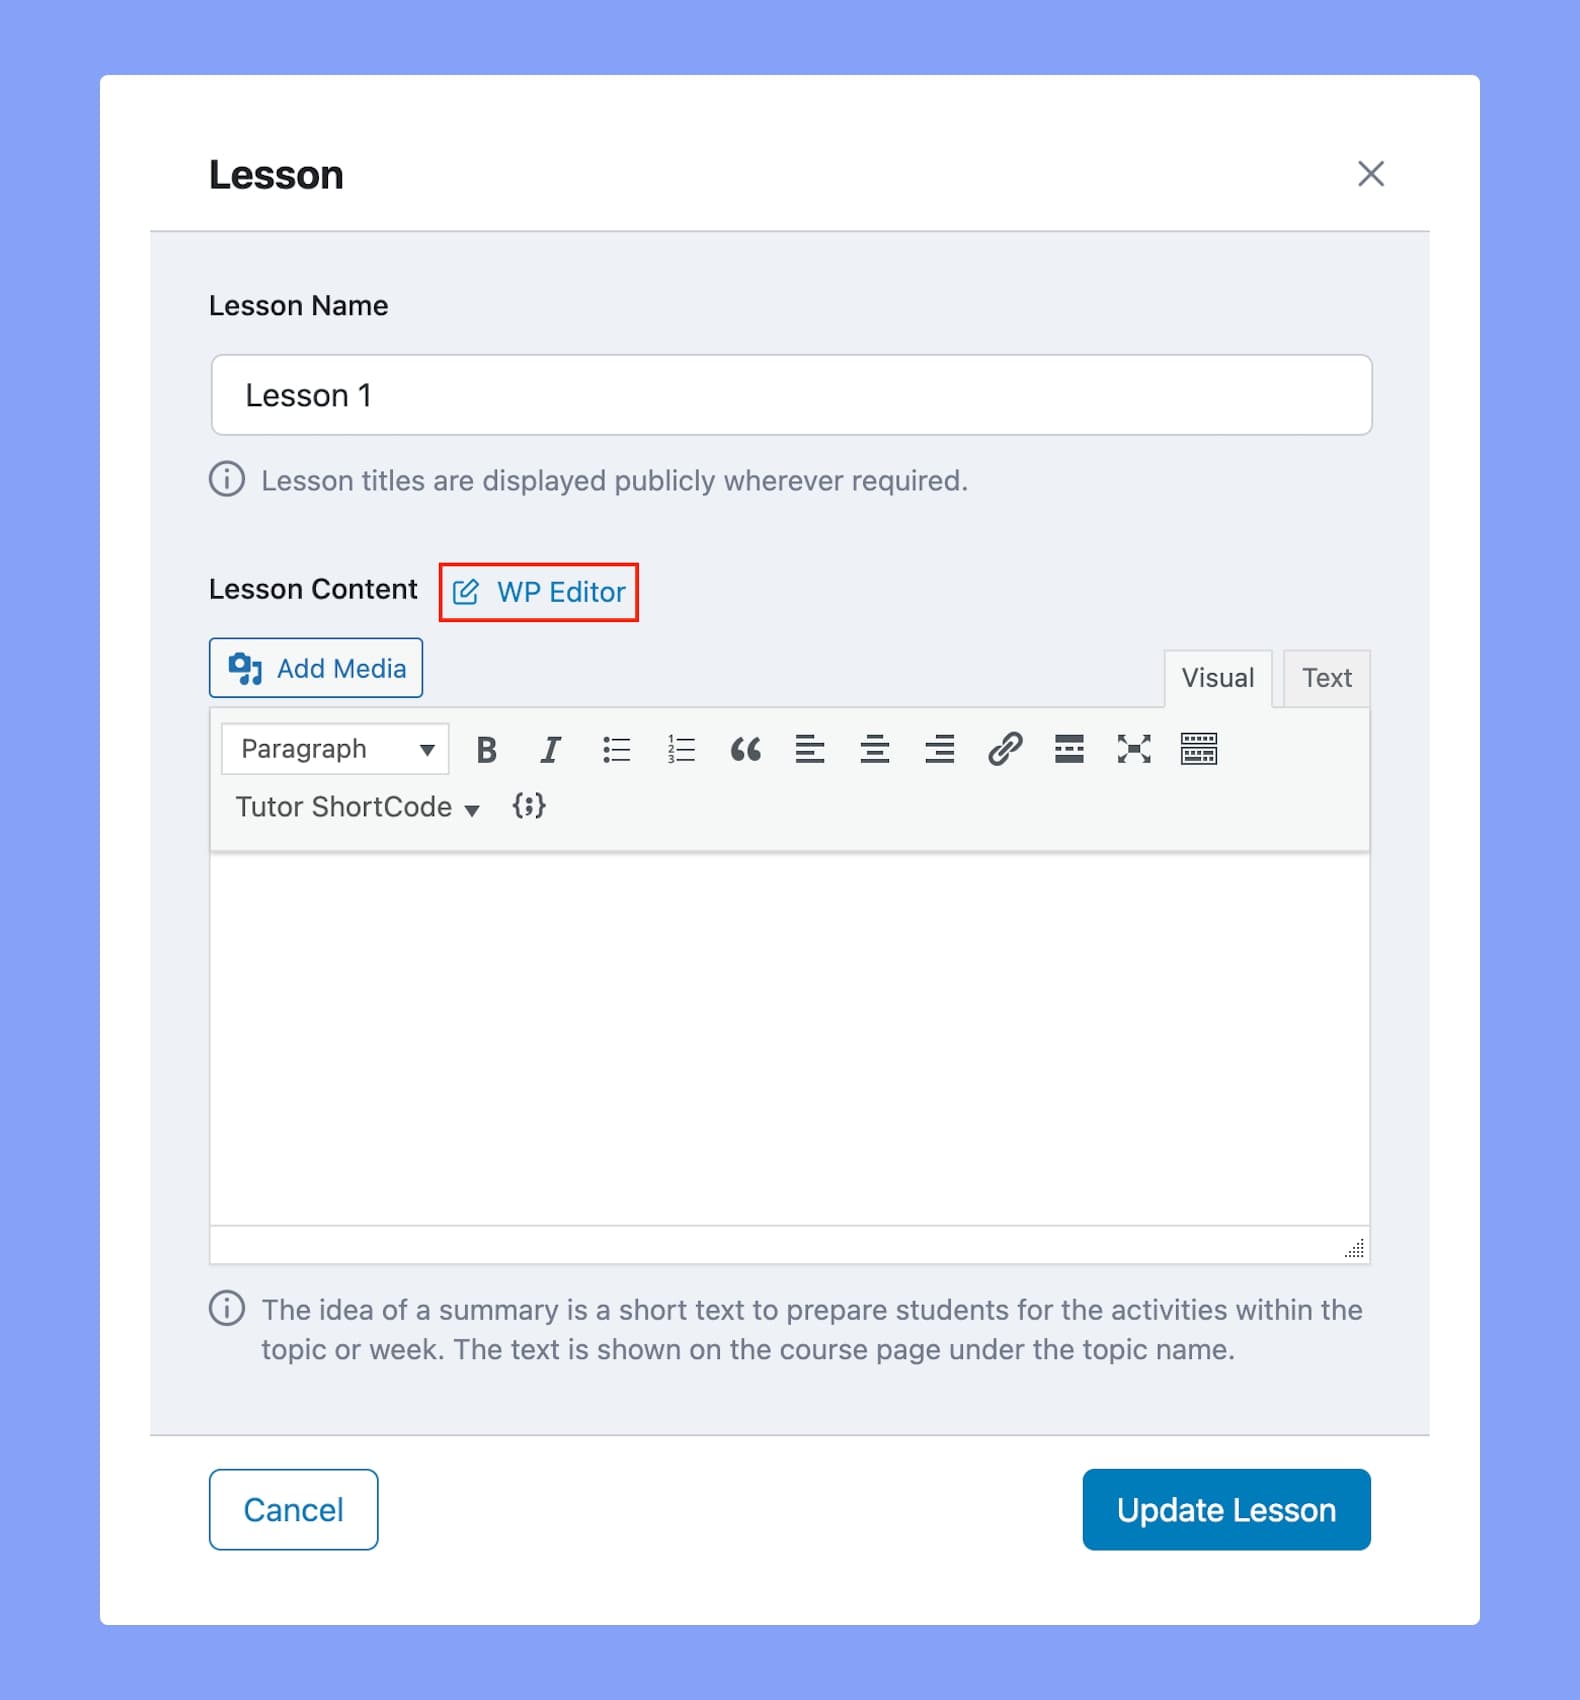 WP Editor on Tutor LMS course page